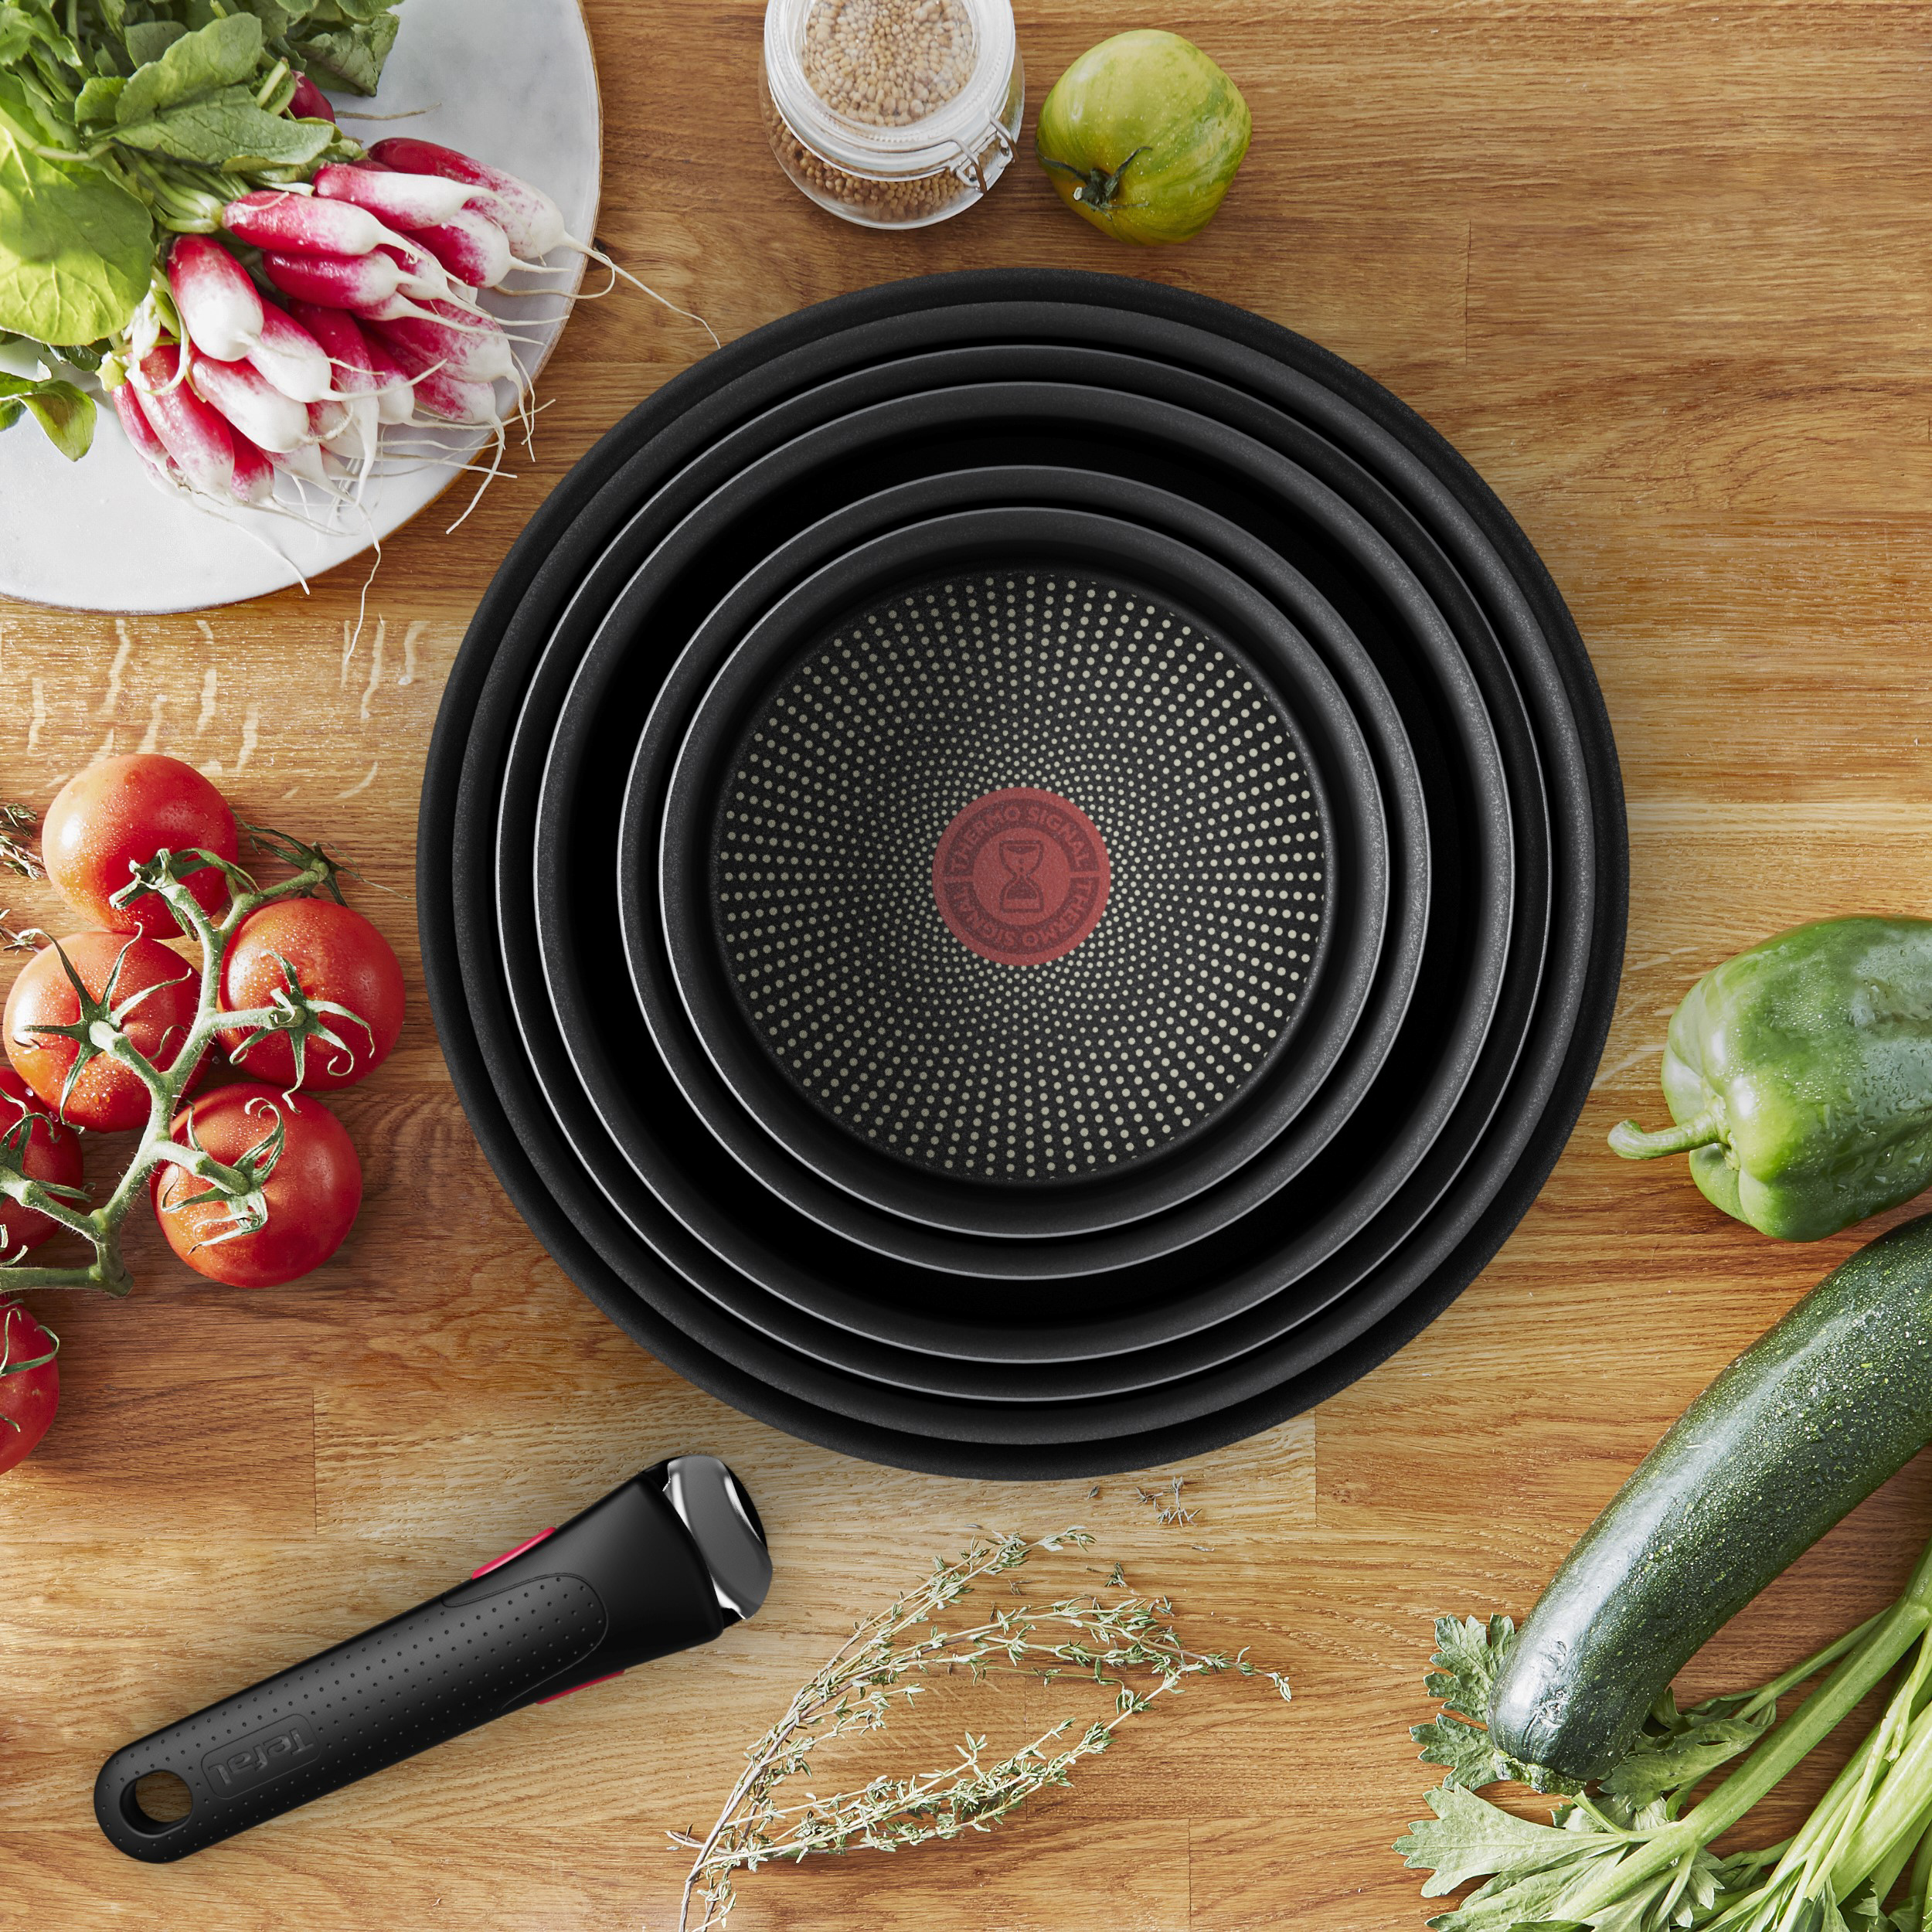 https://www.nordicnest.com/assets/blobs/tefal-ingenio-daily-chef-on-frying-pan-set-8-pieces/515073-01_4_EnvironmentImage-cd4ae05e1a.jpeg